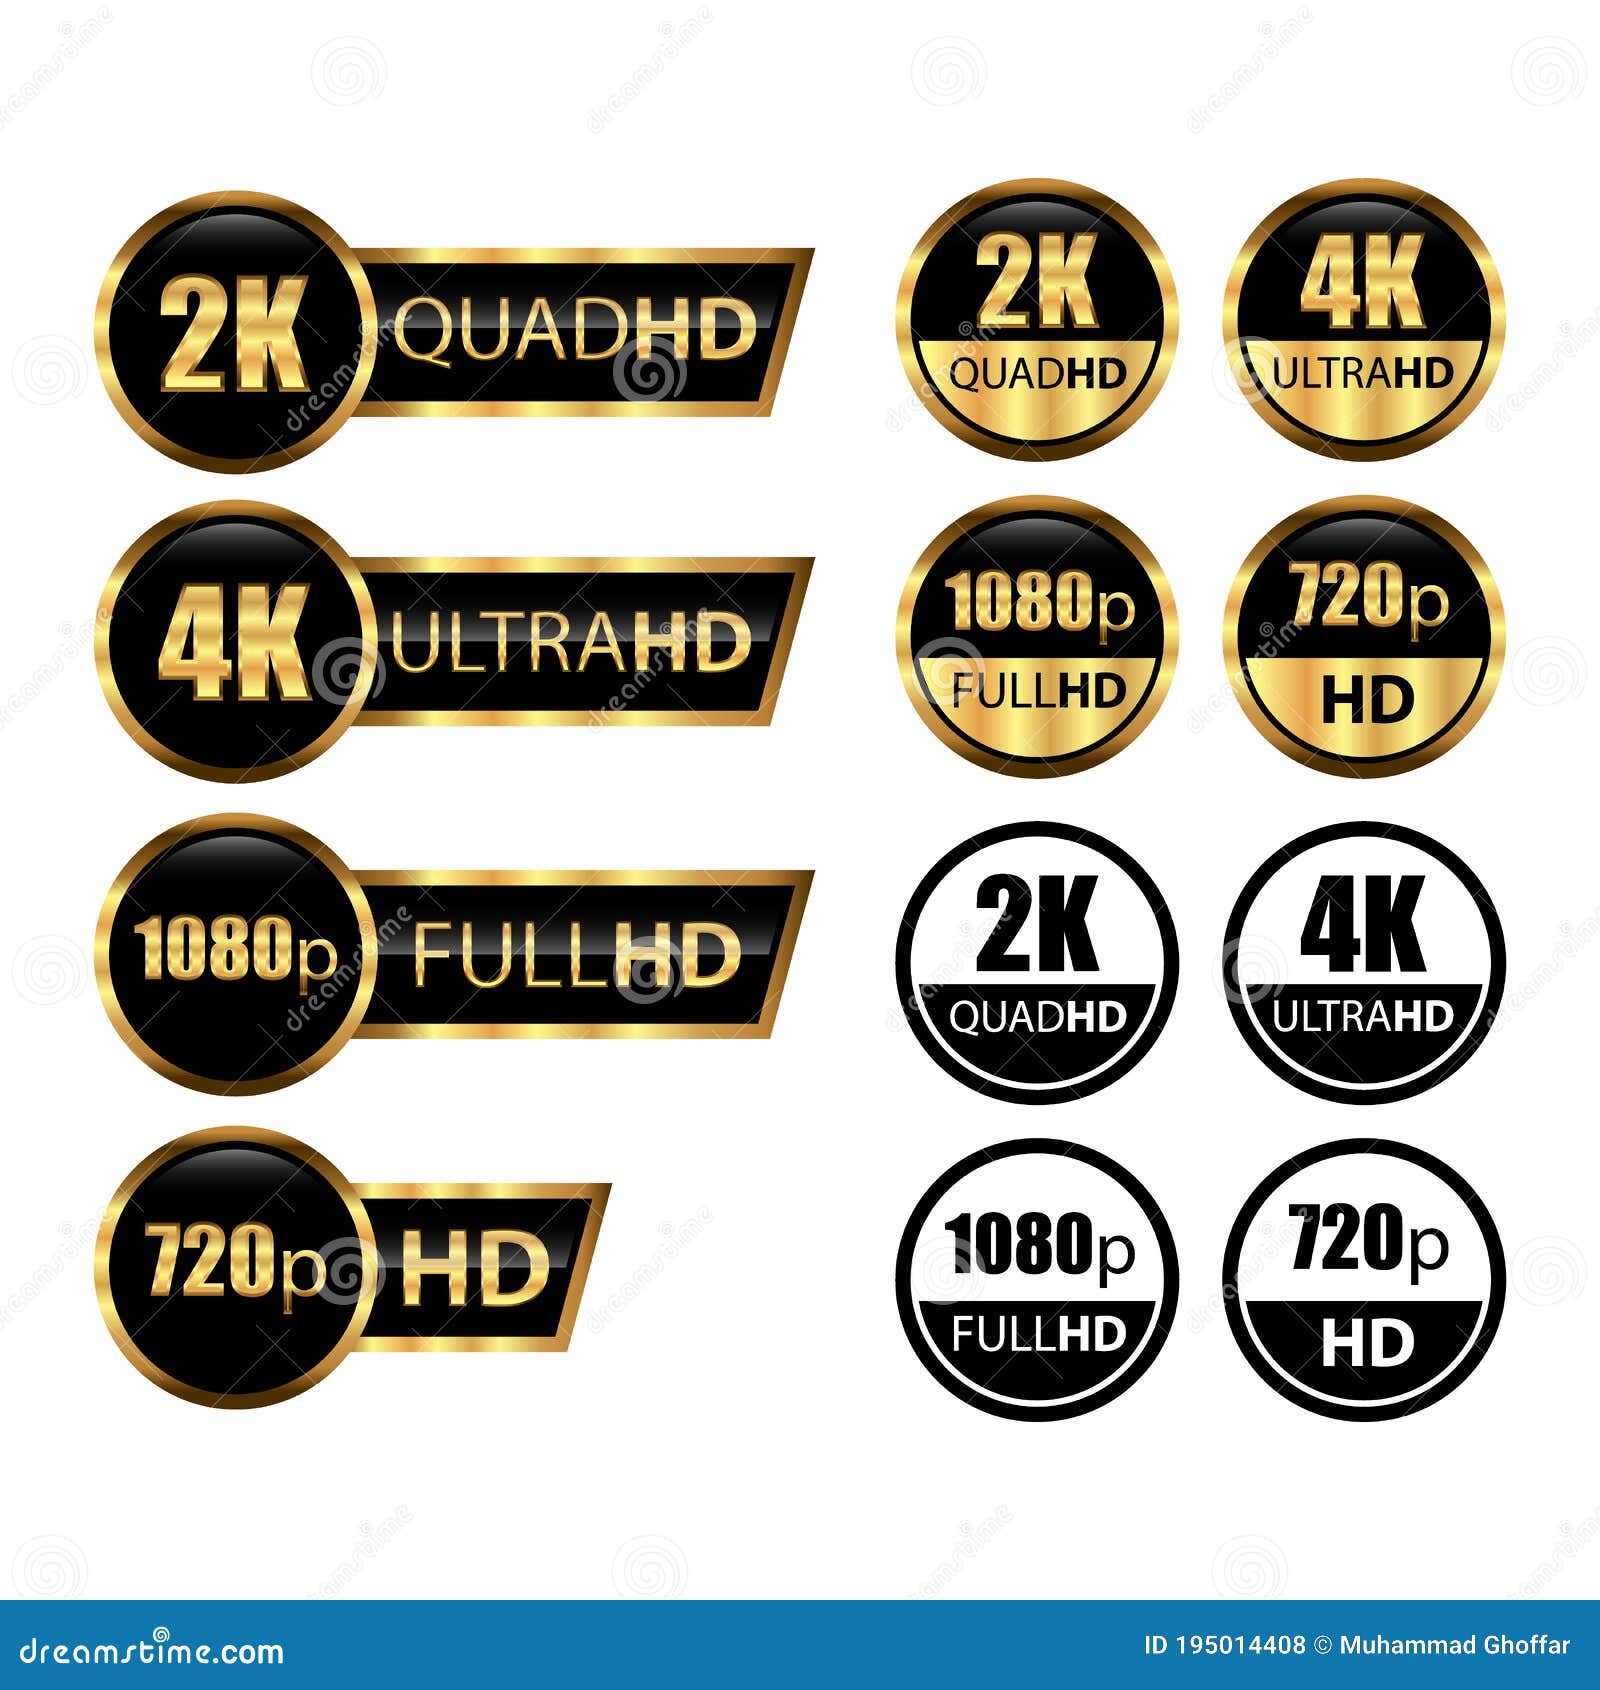 Golden 2k Quad Hd 4k Ultra Hd 7 Hd And 1080p Full Hd Video Resolution Icon Logo High Definition Tv Game Screen Monitor Stock Vector Illustration Of Entertainment Symbol